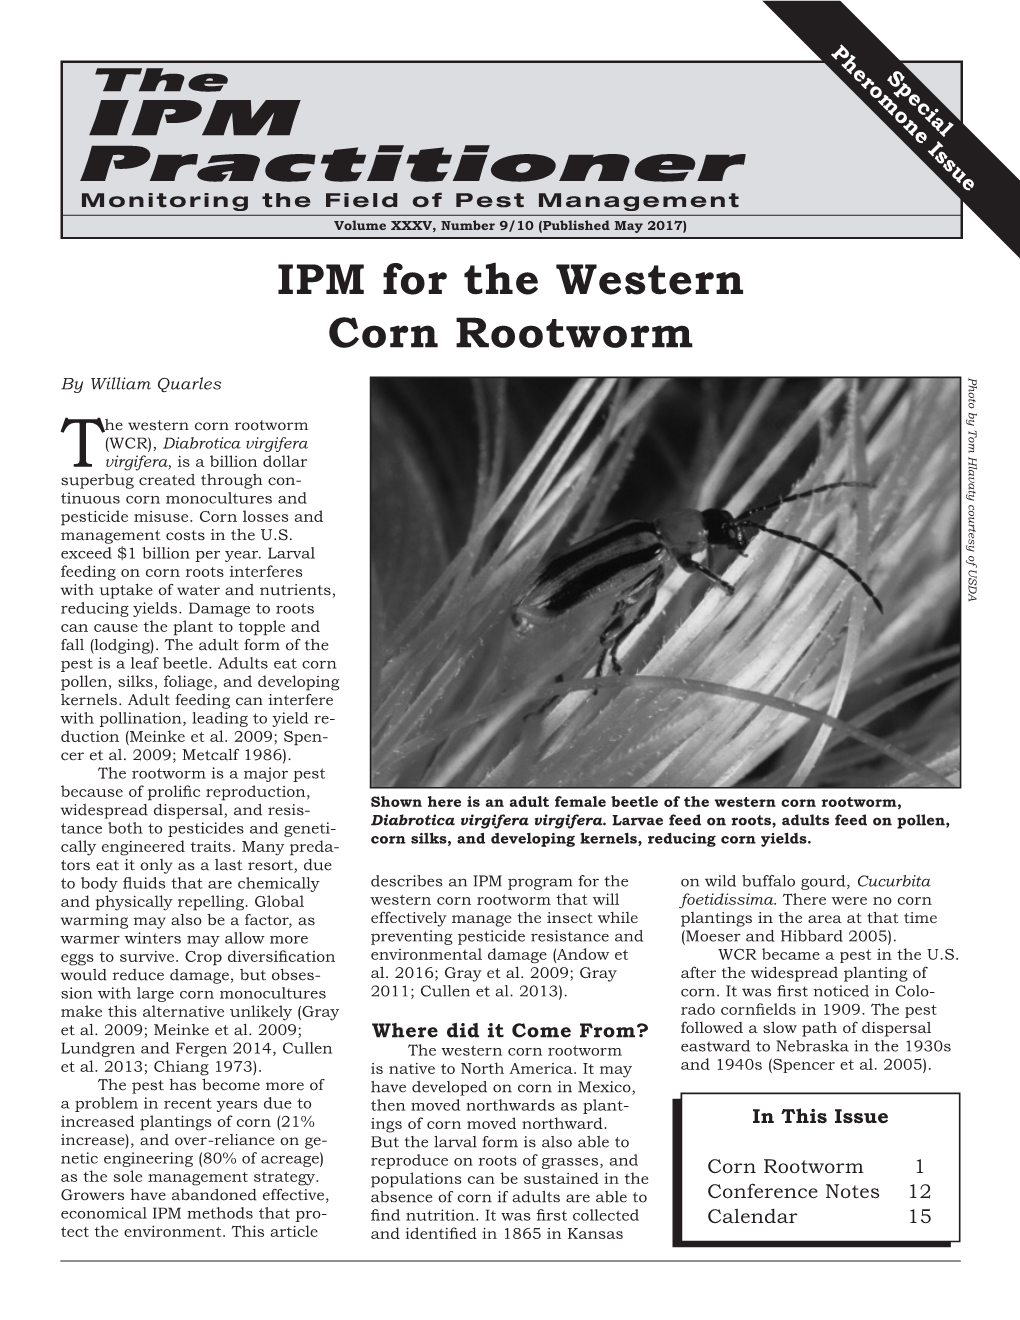 IPM for the Western Corn Rootworm